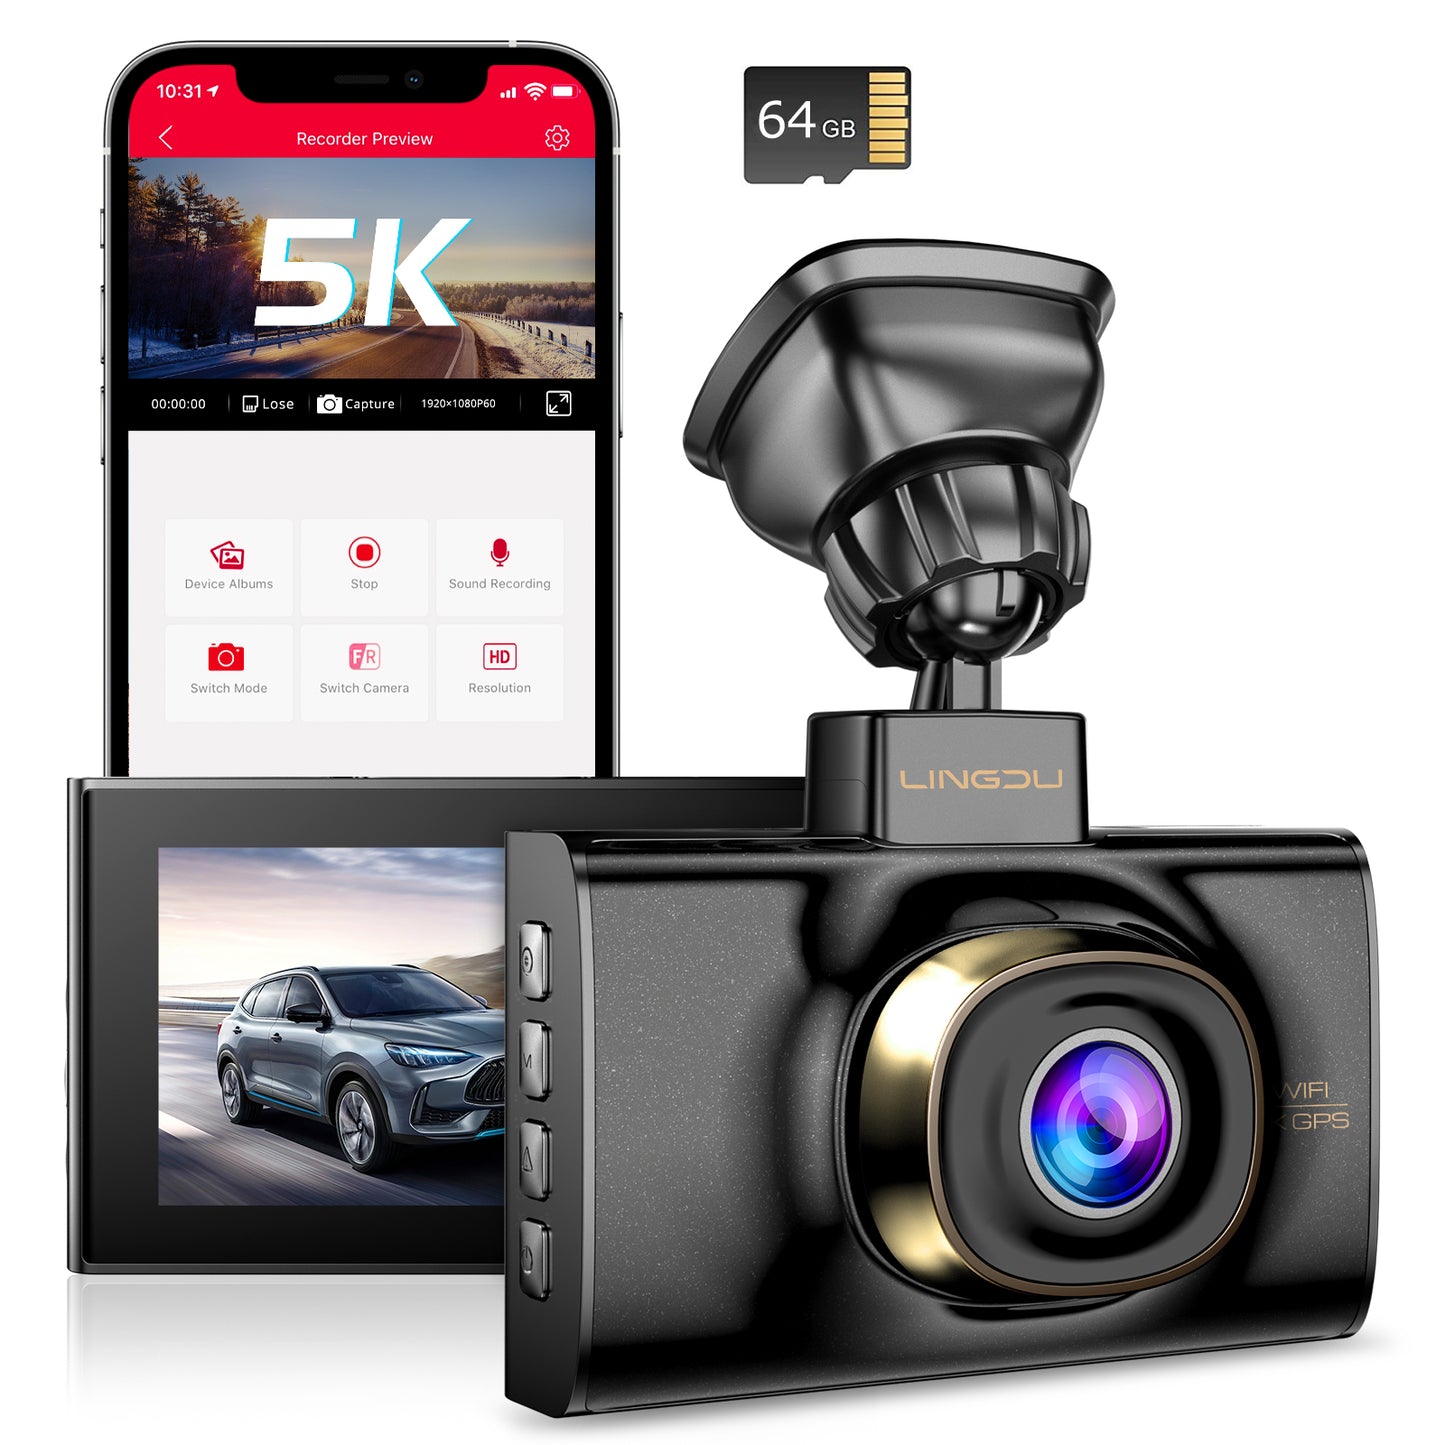 LINGDU LD02 Rearview Mirror Camera - The 5K Ultra HD Single-Channel Dash Cam for Car with Free 64GB Card